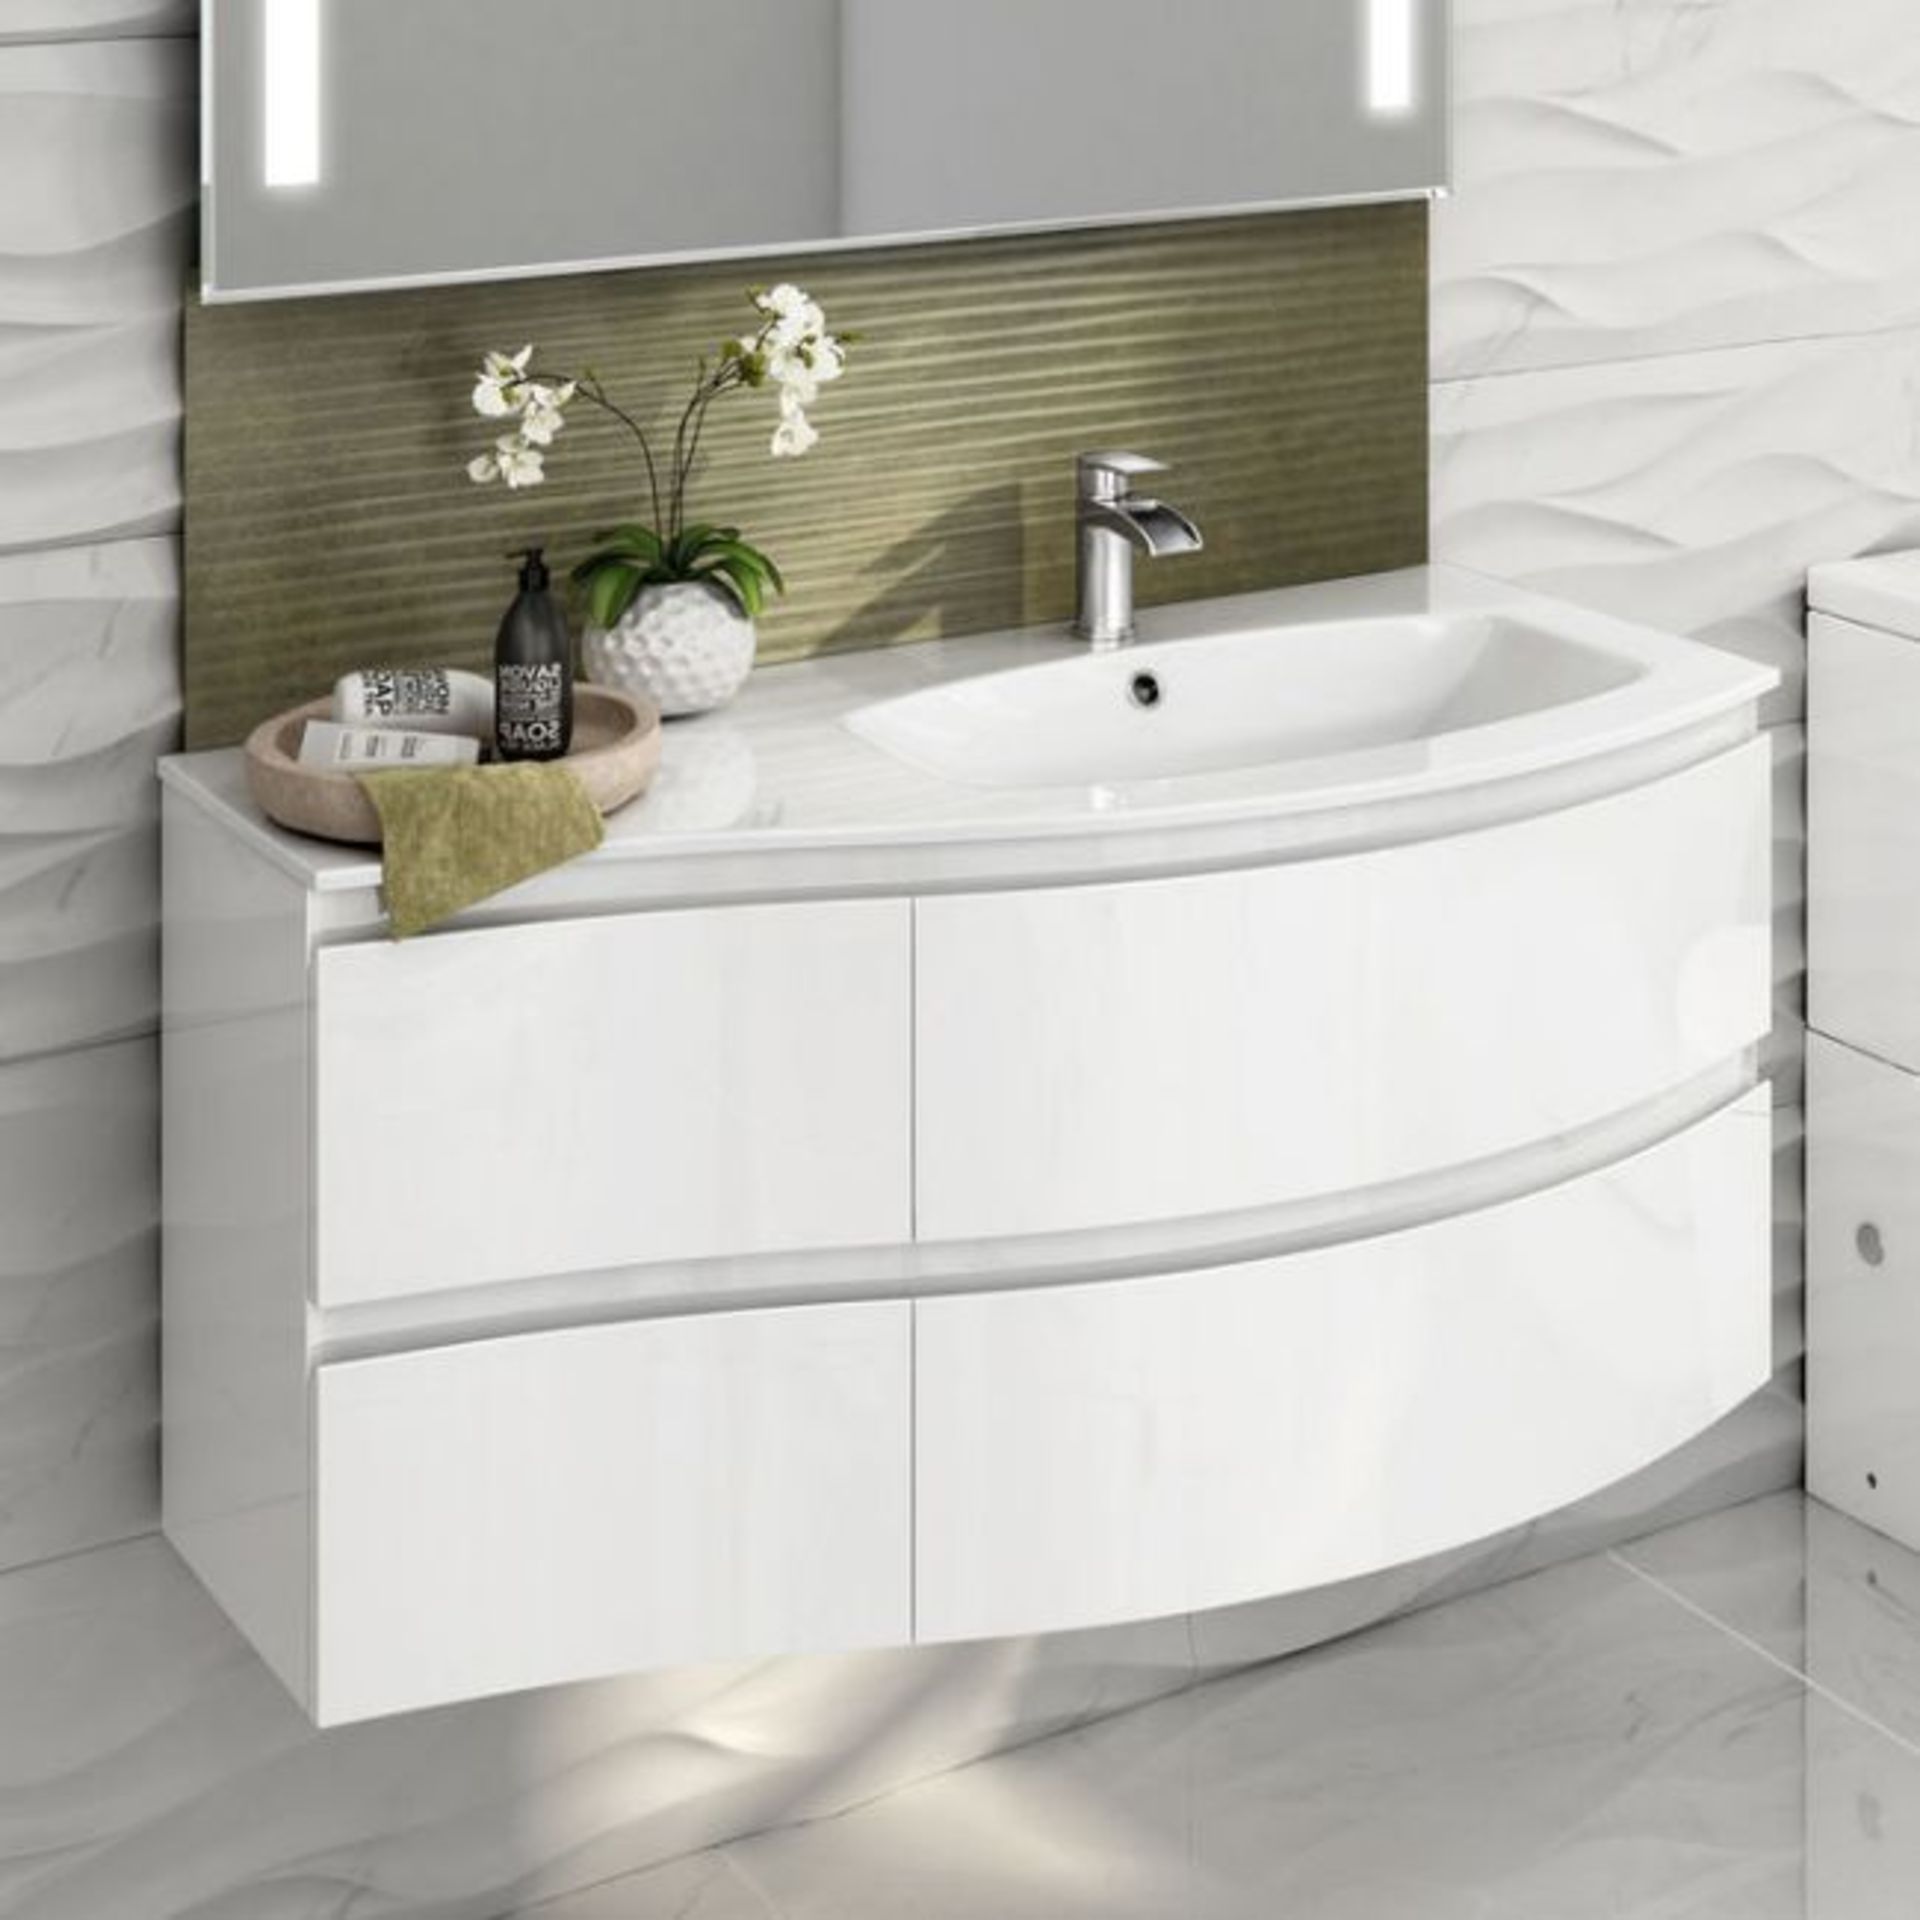 New 1040mm Amelie High Gloss White Curved Vanity Unit - Right Hand - Wall Hung. RRP £899.99.